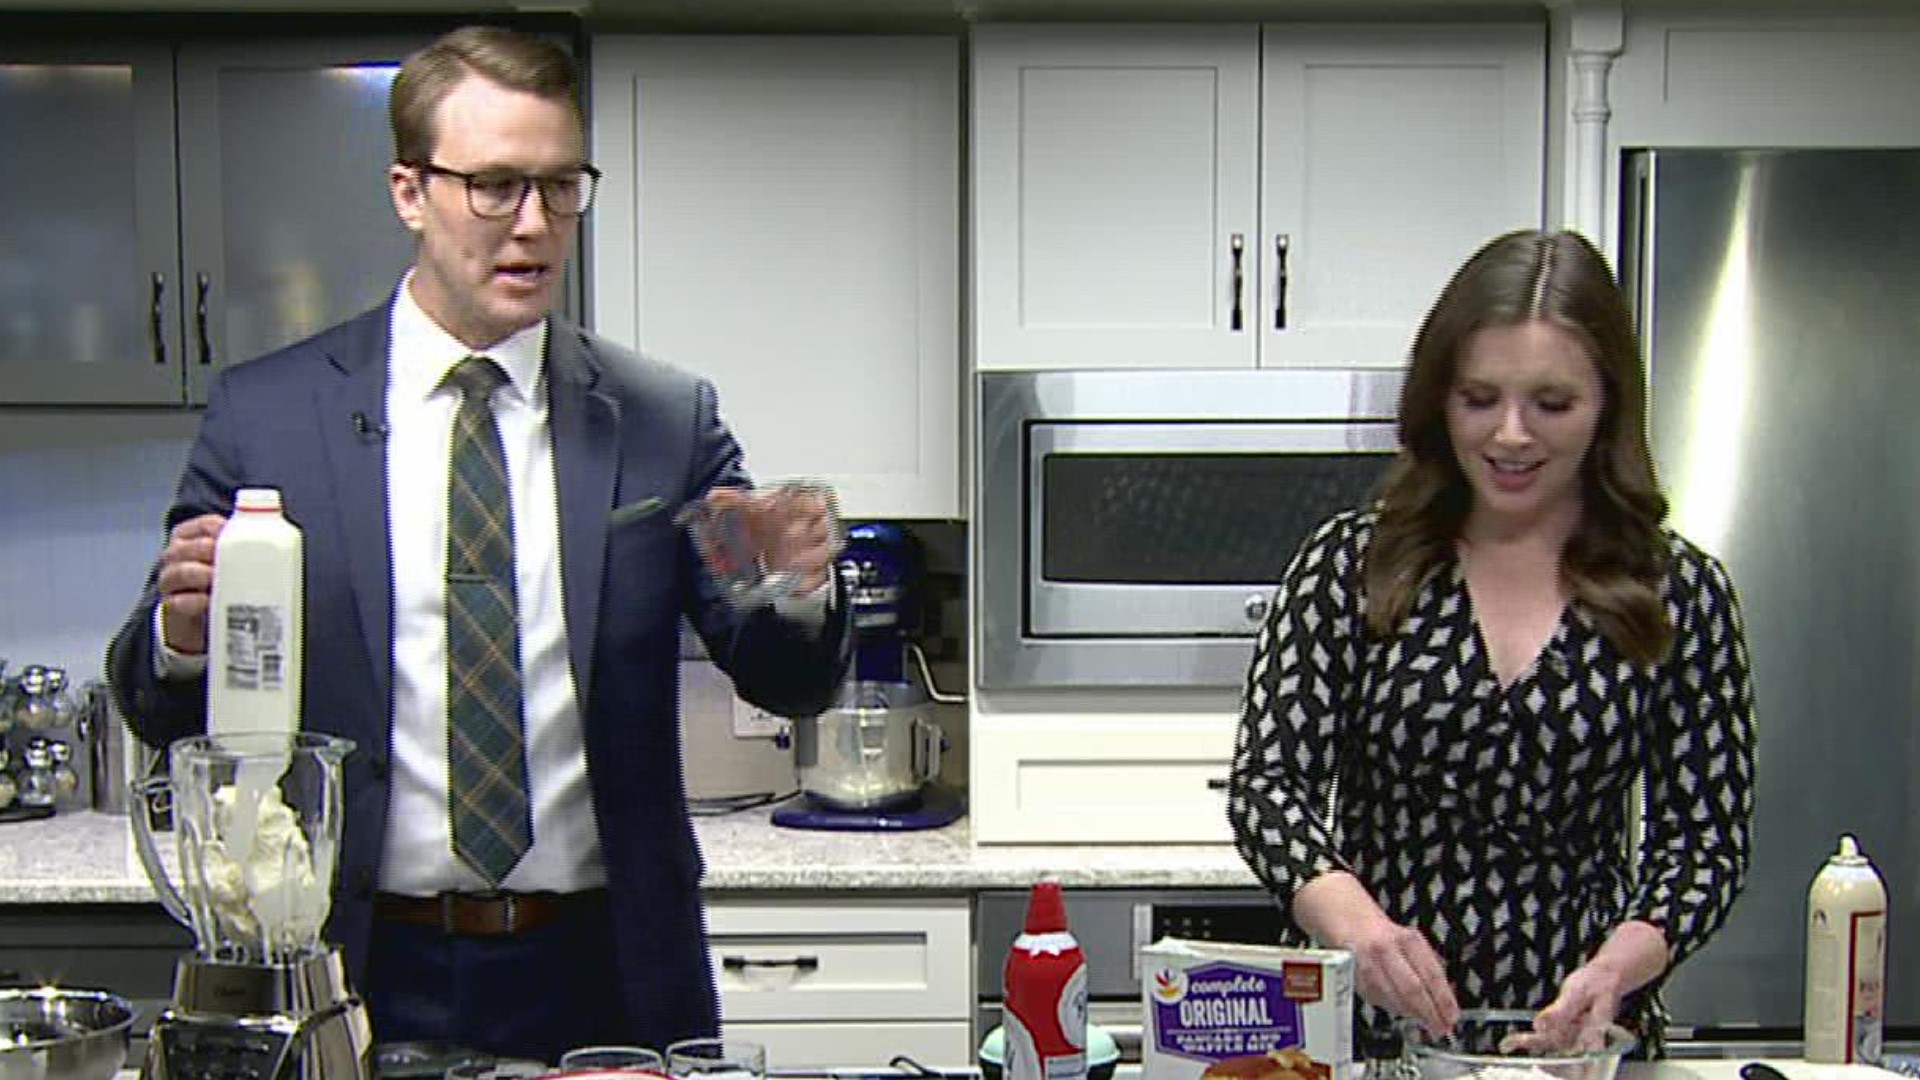 FOX43's Sean Streicher and Danielle Miller will compete against teams from Pa. news stations for the best milkshake at the Undeniably Dairy Shake-Off on Saturday.